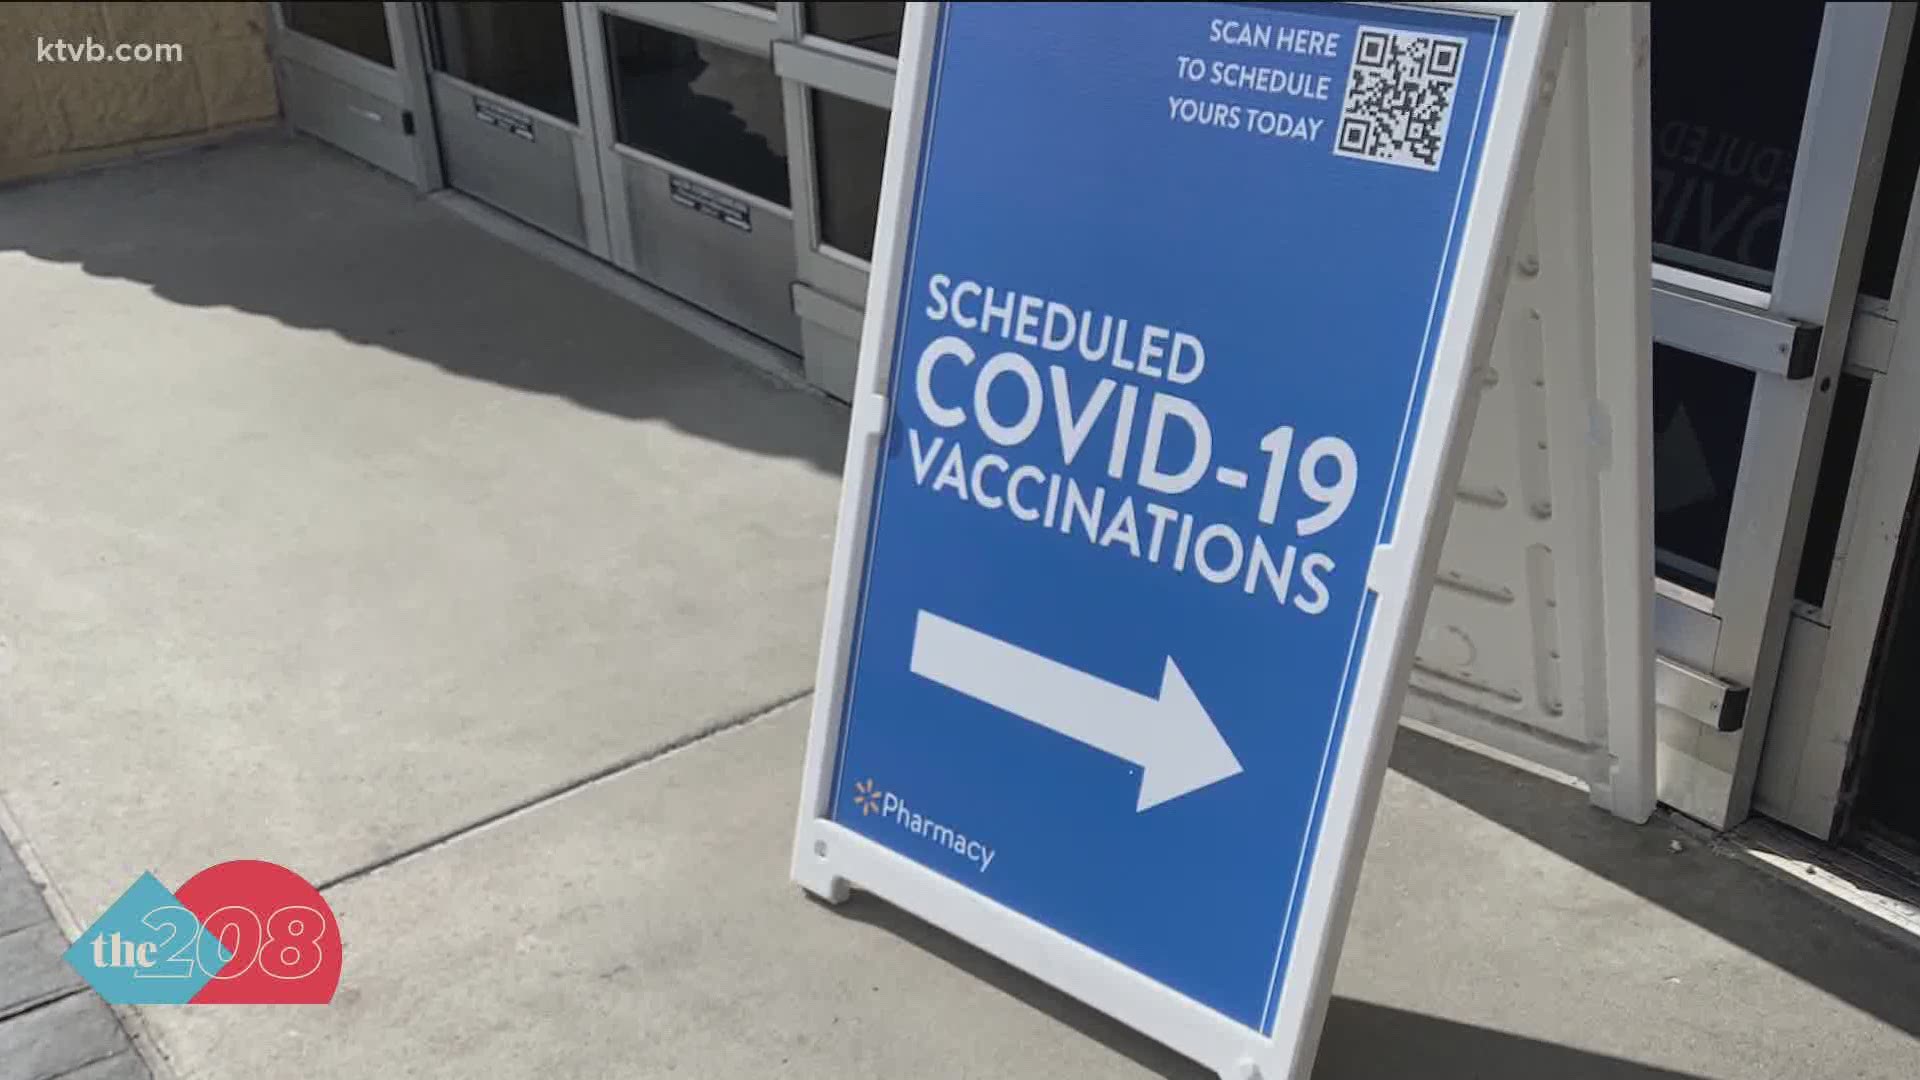 Their is a no-waste waitlist at the Garden City Walmart where people not in the current priority category go to get vaccinated.